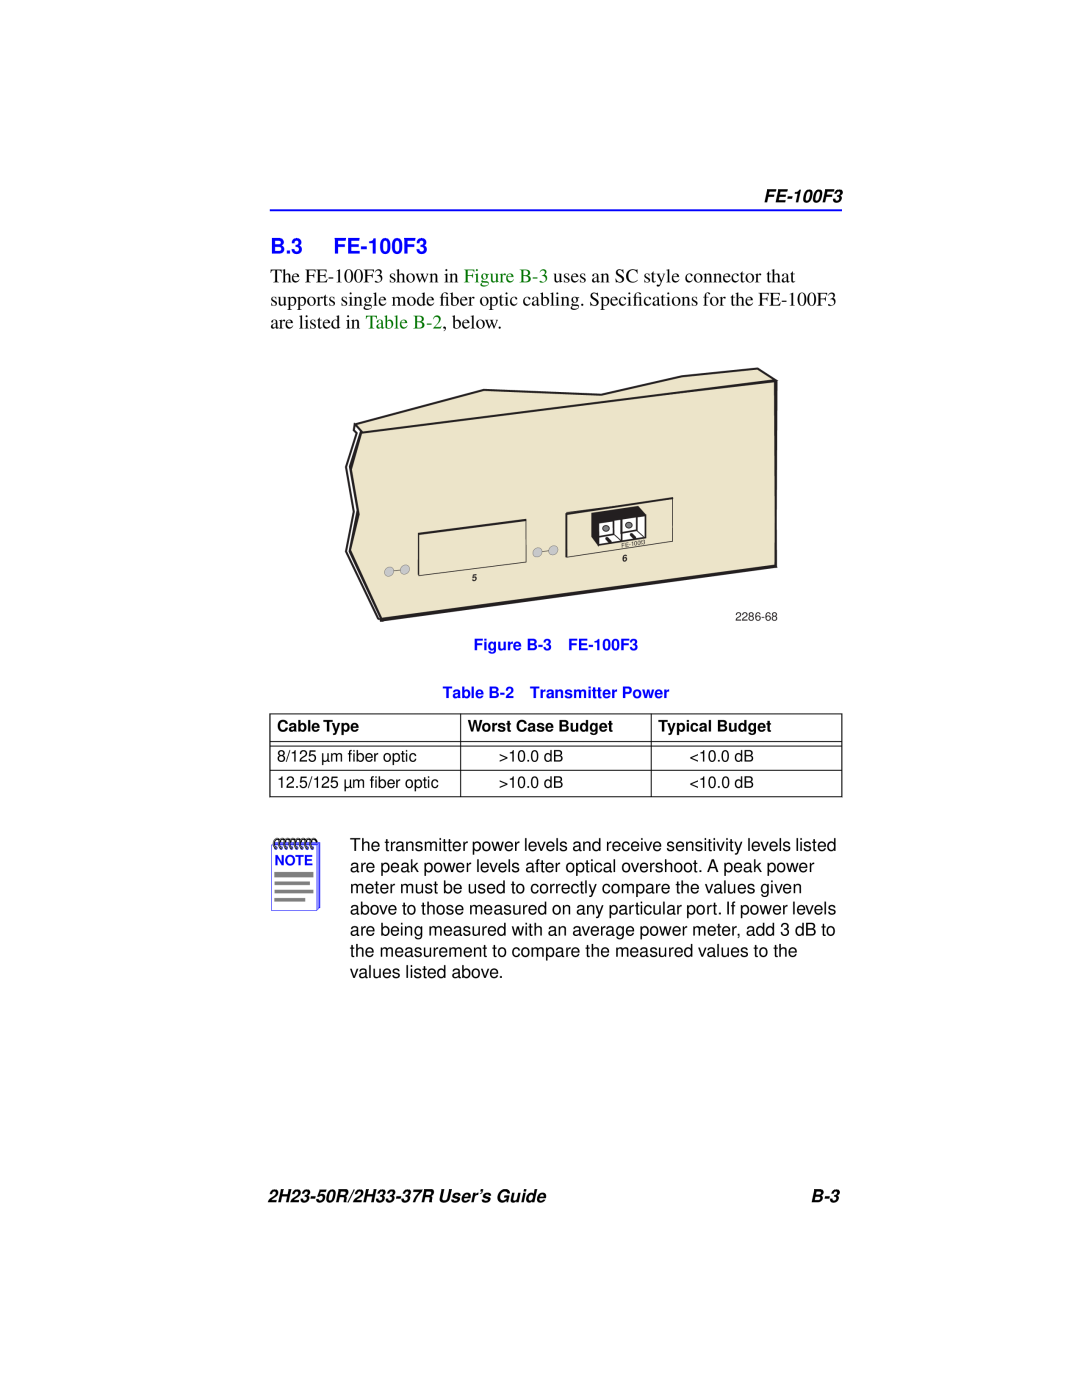 Cabletron Systems manual B.3 FE-100F3, 2H23-50R/2H33-37R User’s Guide, FE-100f3 